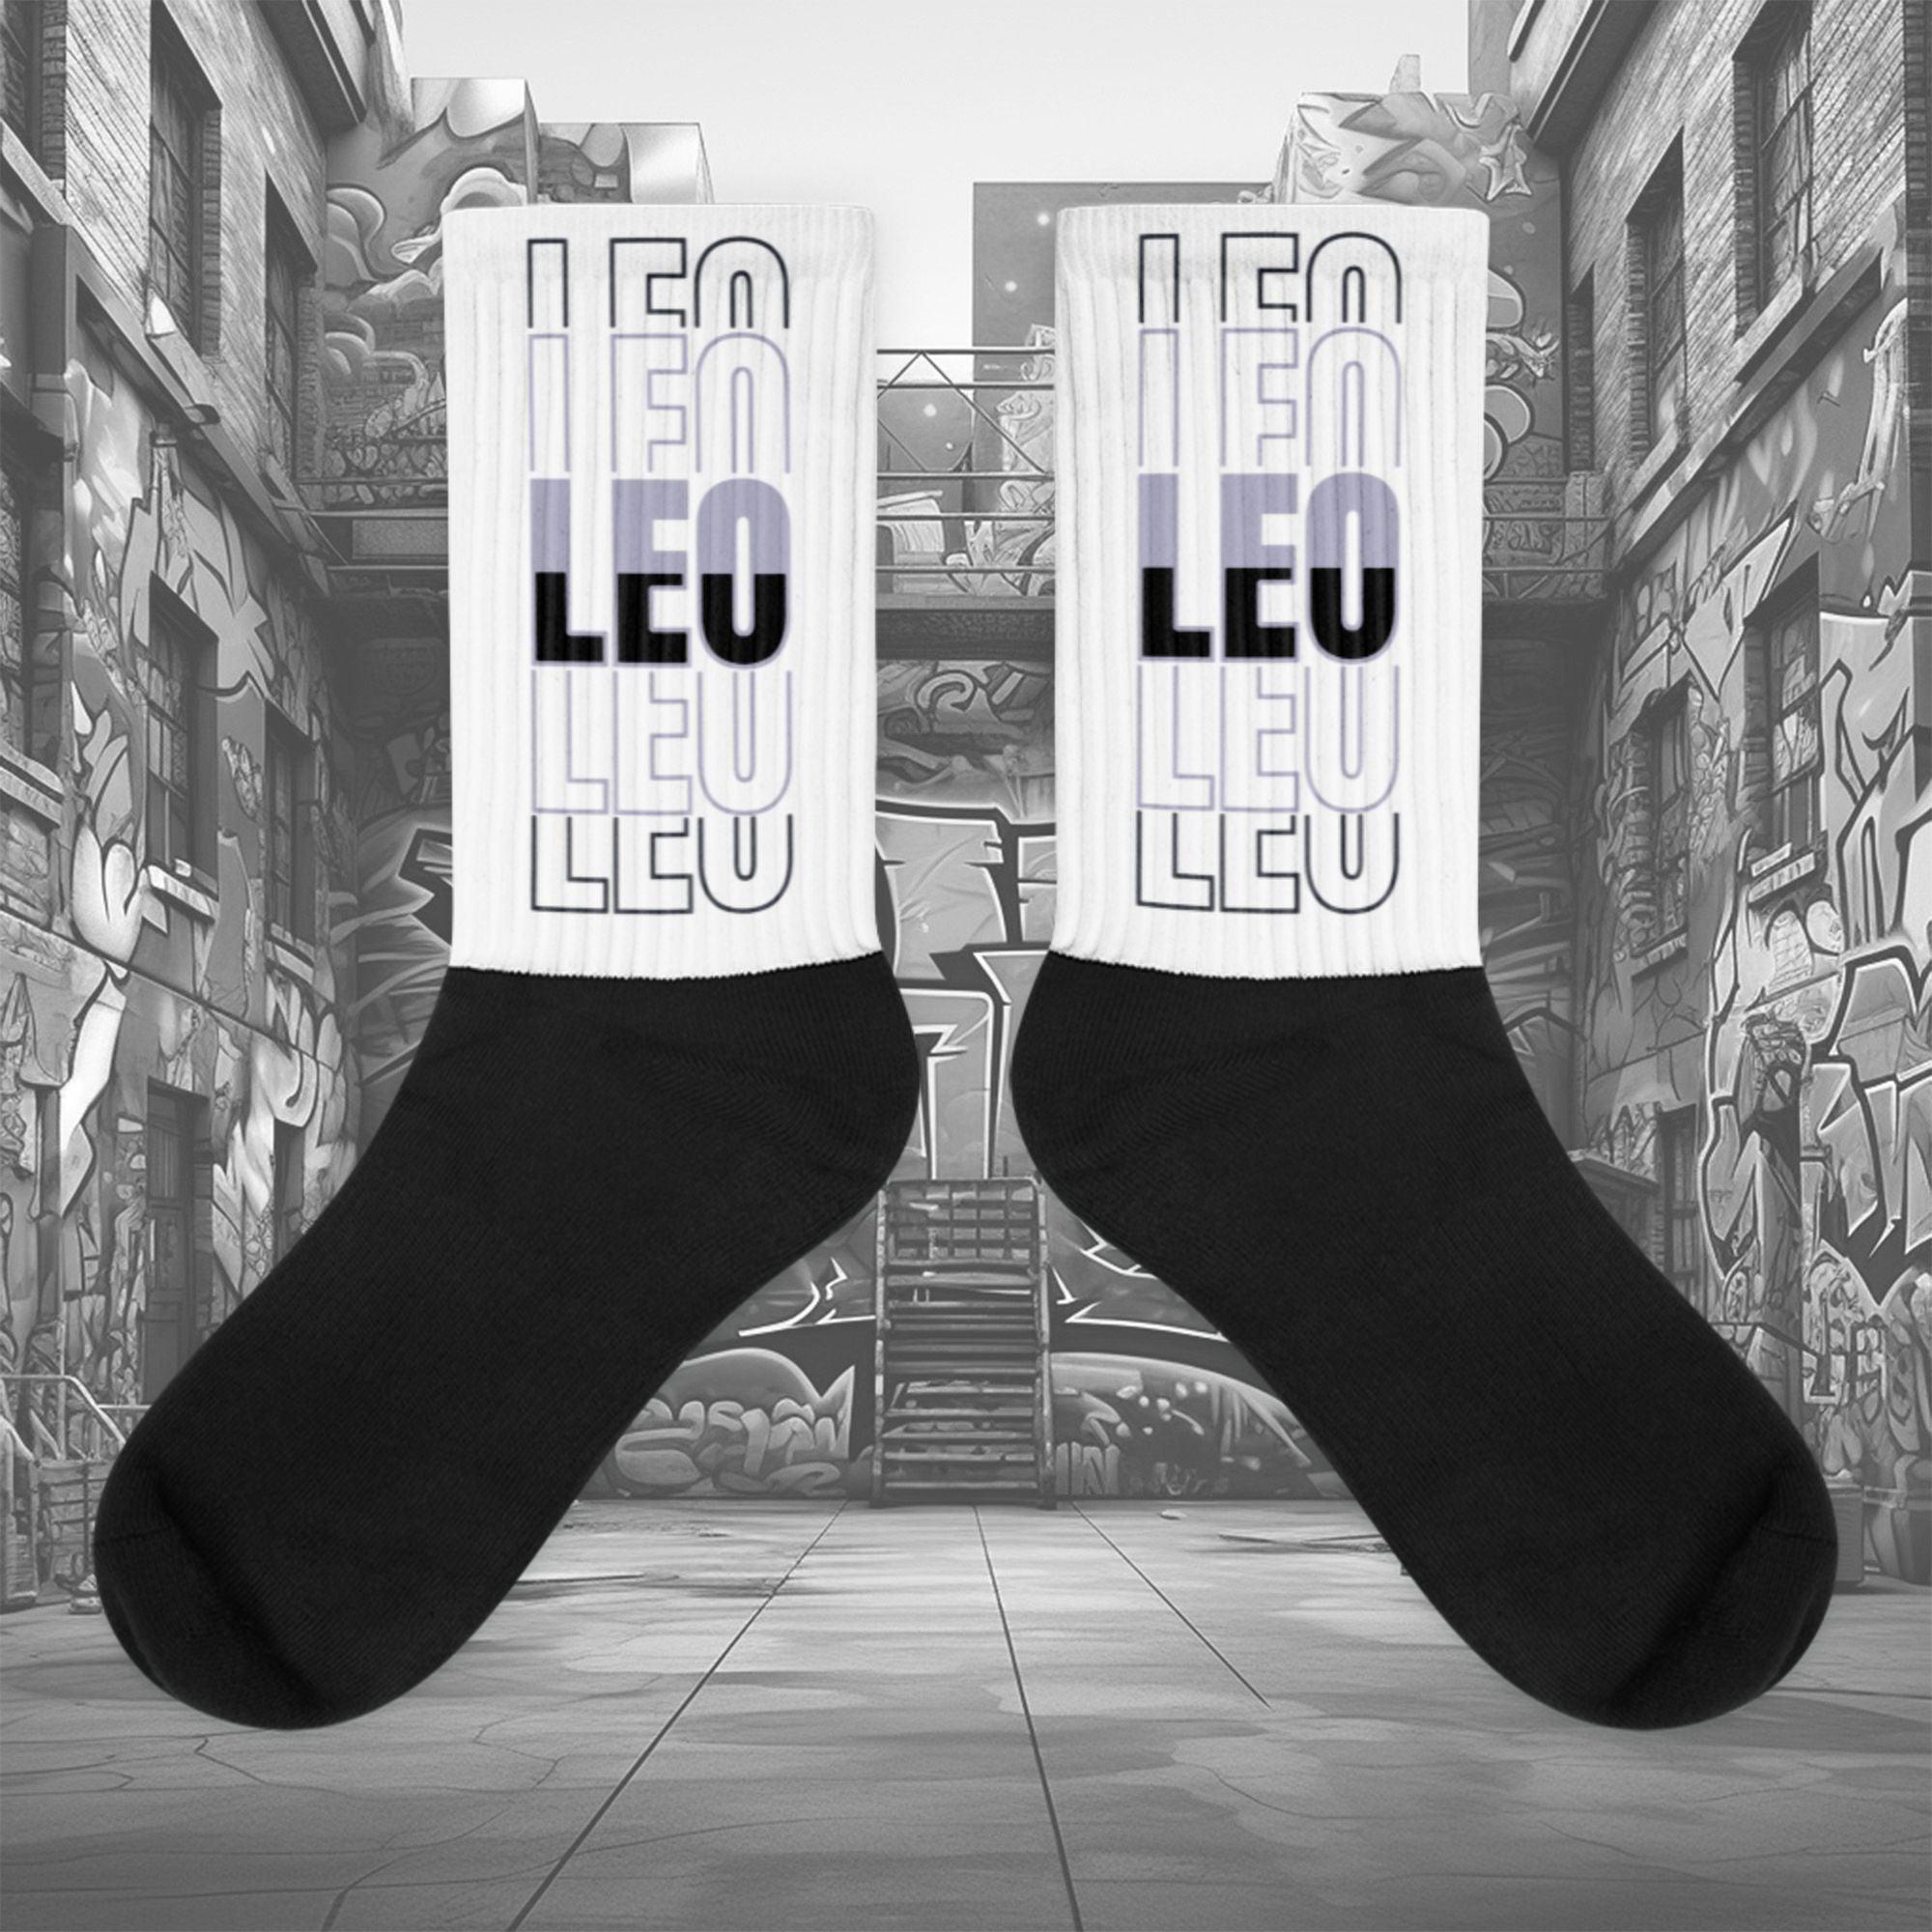  Showcases the view of the socks, highlighting the vibrant 'LEO' design, which perfectly complements the Air Jordan 8 Winterized  sneakers. The intricate pattern and color scheme inspired by the  theme are prominently displayed.  Focusing on the ribbed leg , cusioned bottoms and the snug fit of the socks. This angle provides a clear view of the texture and quality of the material blend.